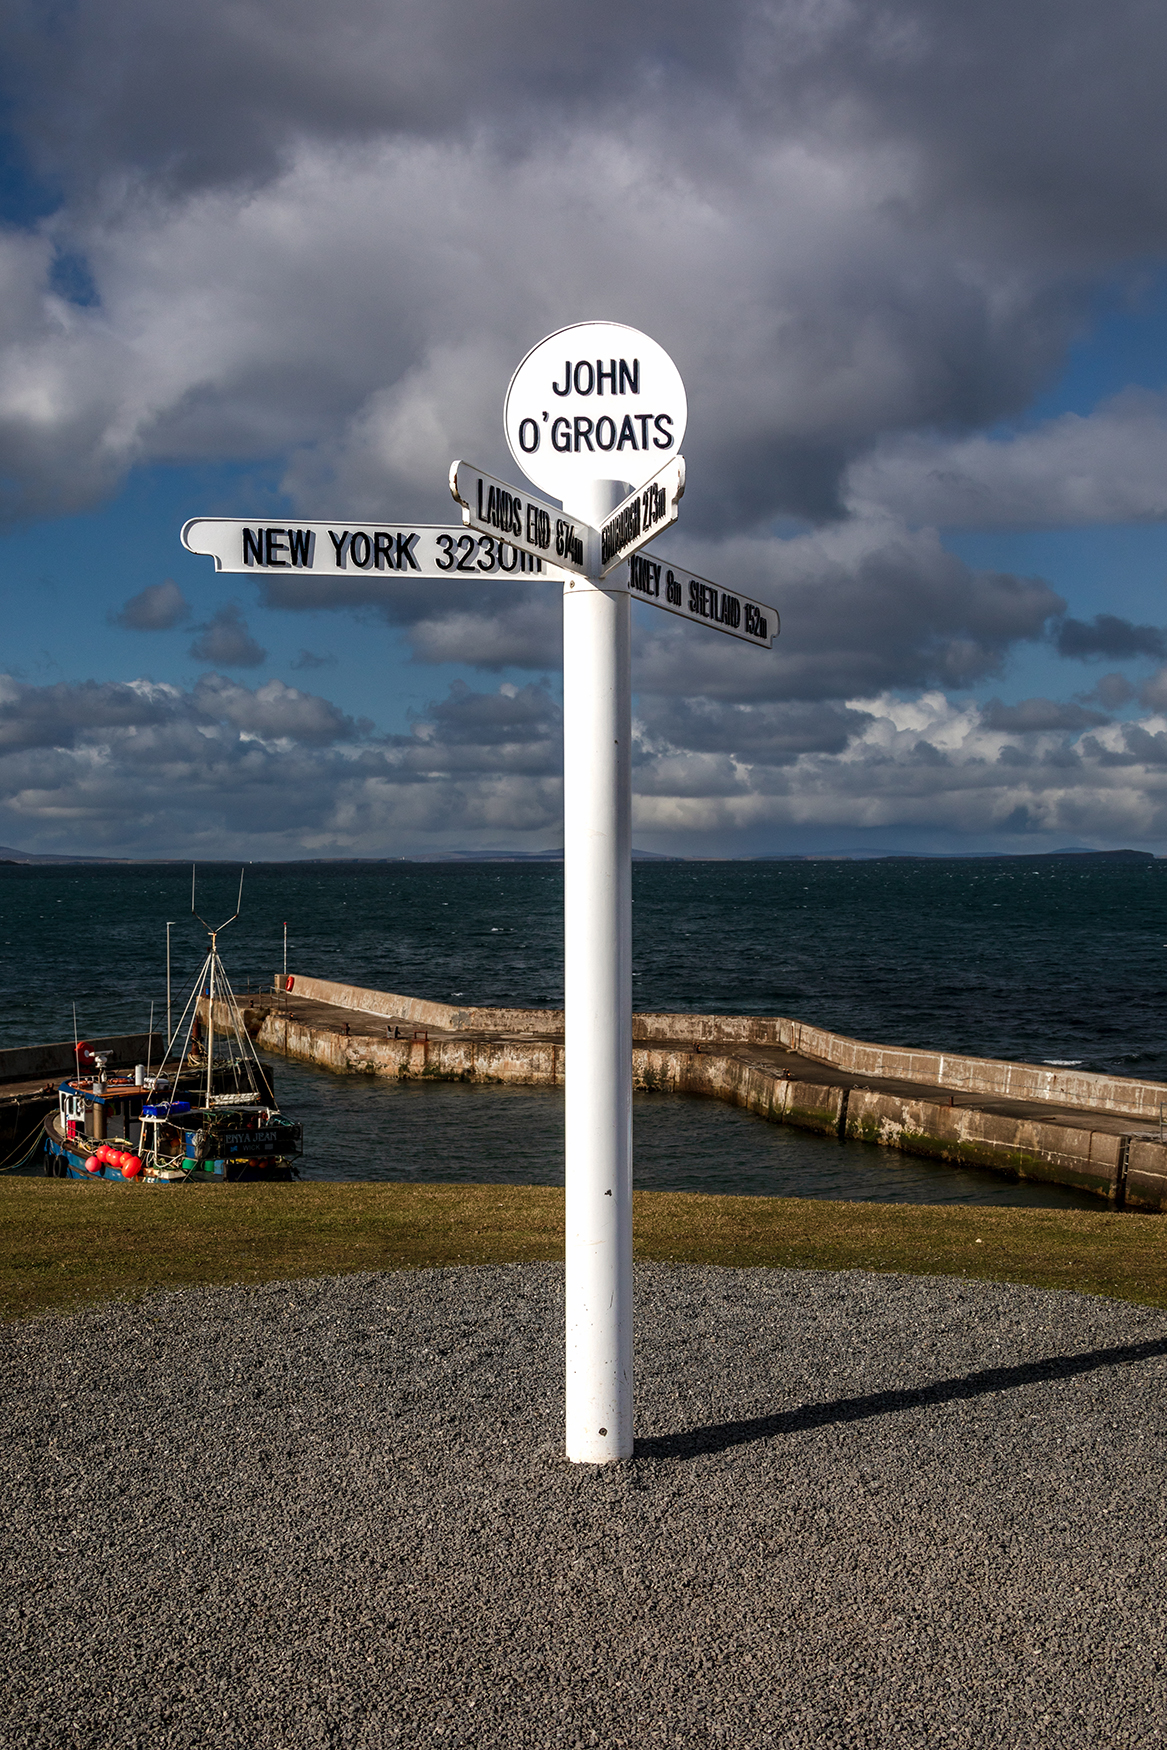 John O'Groats - The iconic location in the far north of Scotland